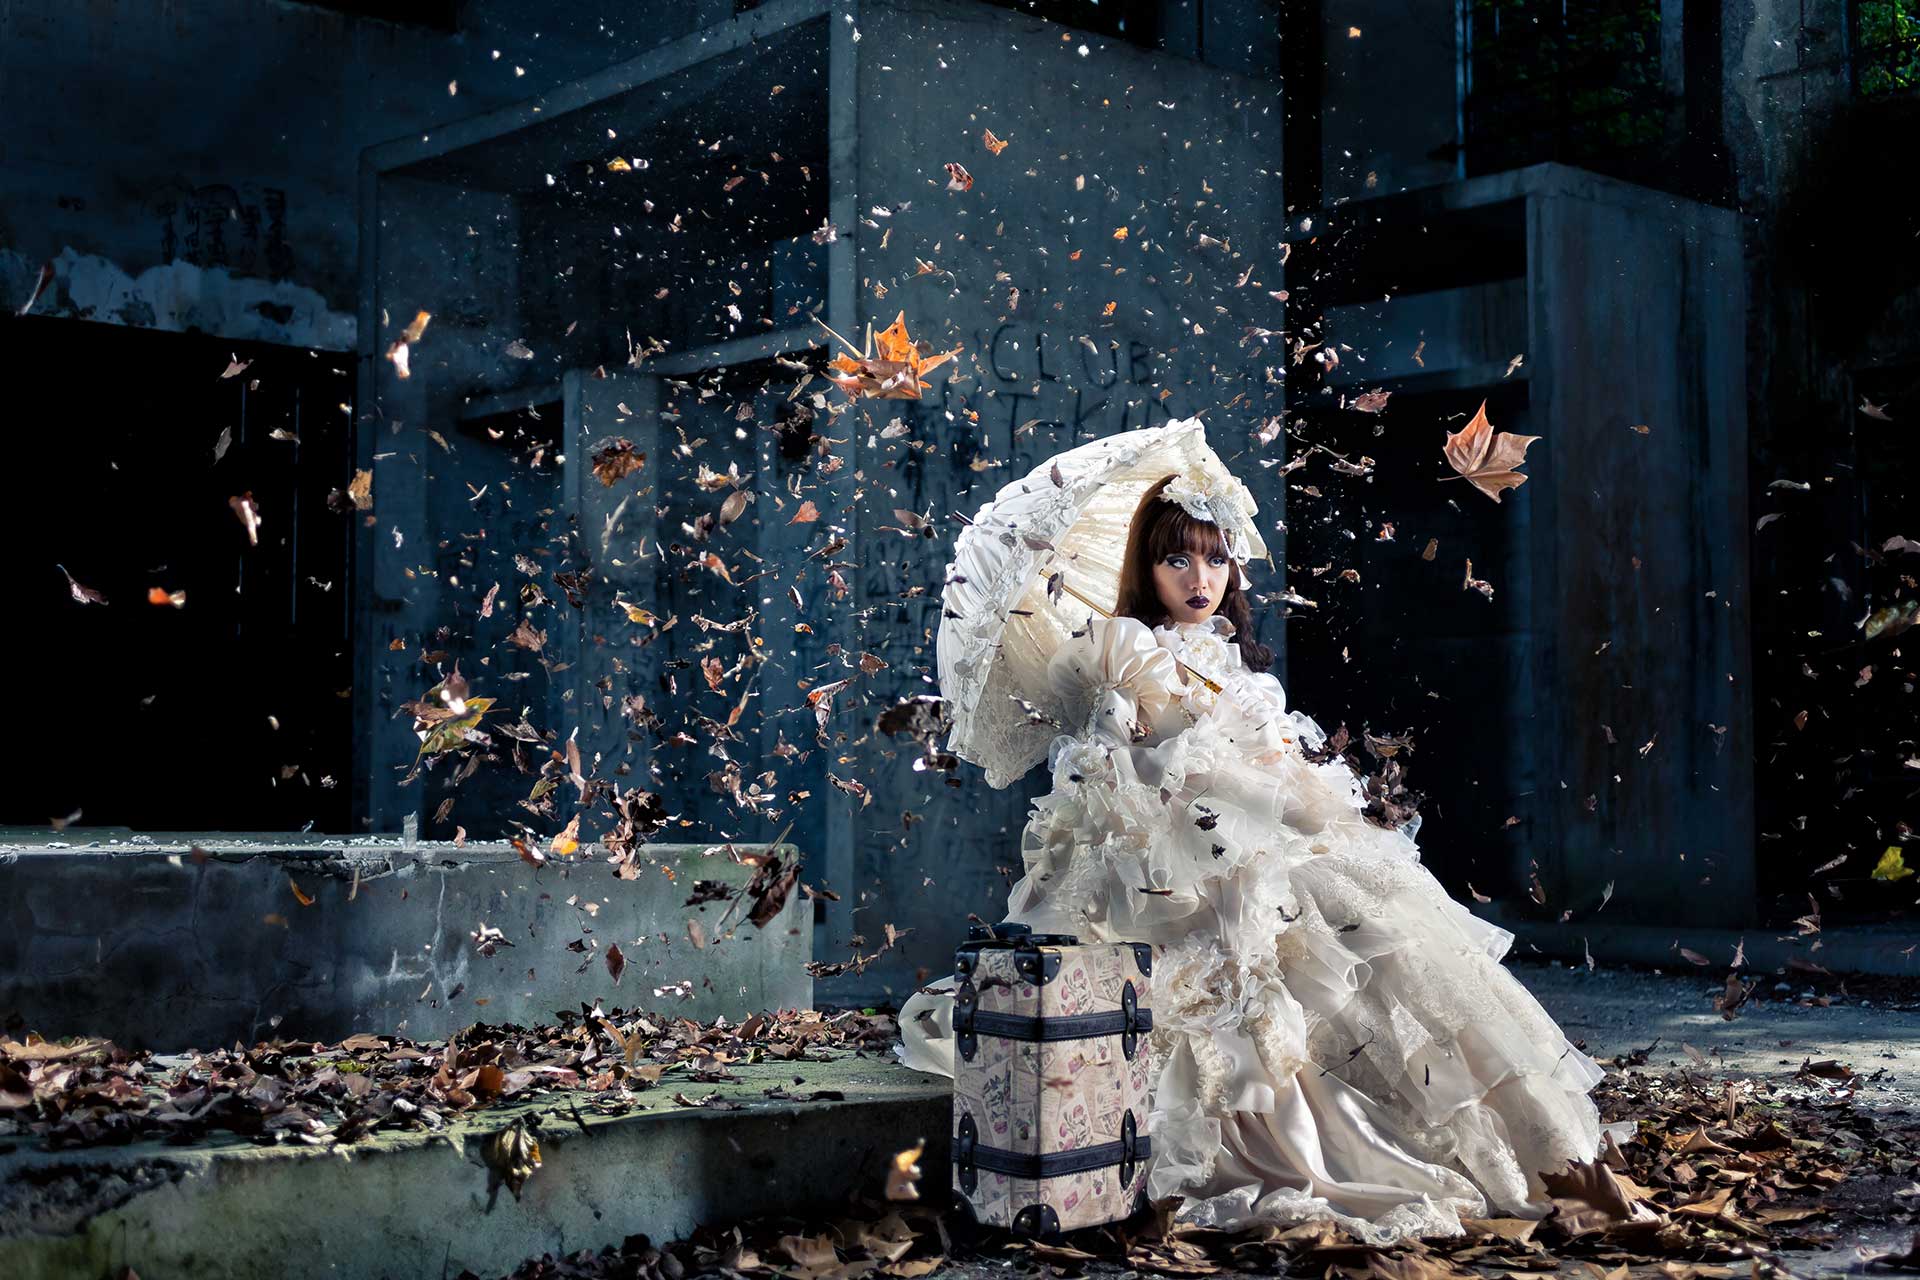 Bride in white dress sitting on ground with falling leaves, part of groom creative pre-wedding photoshoot.